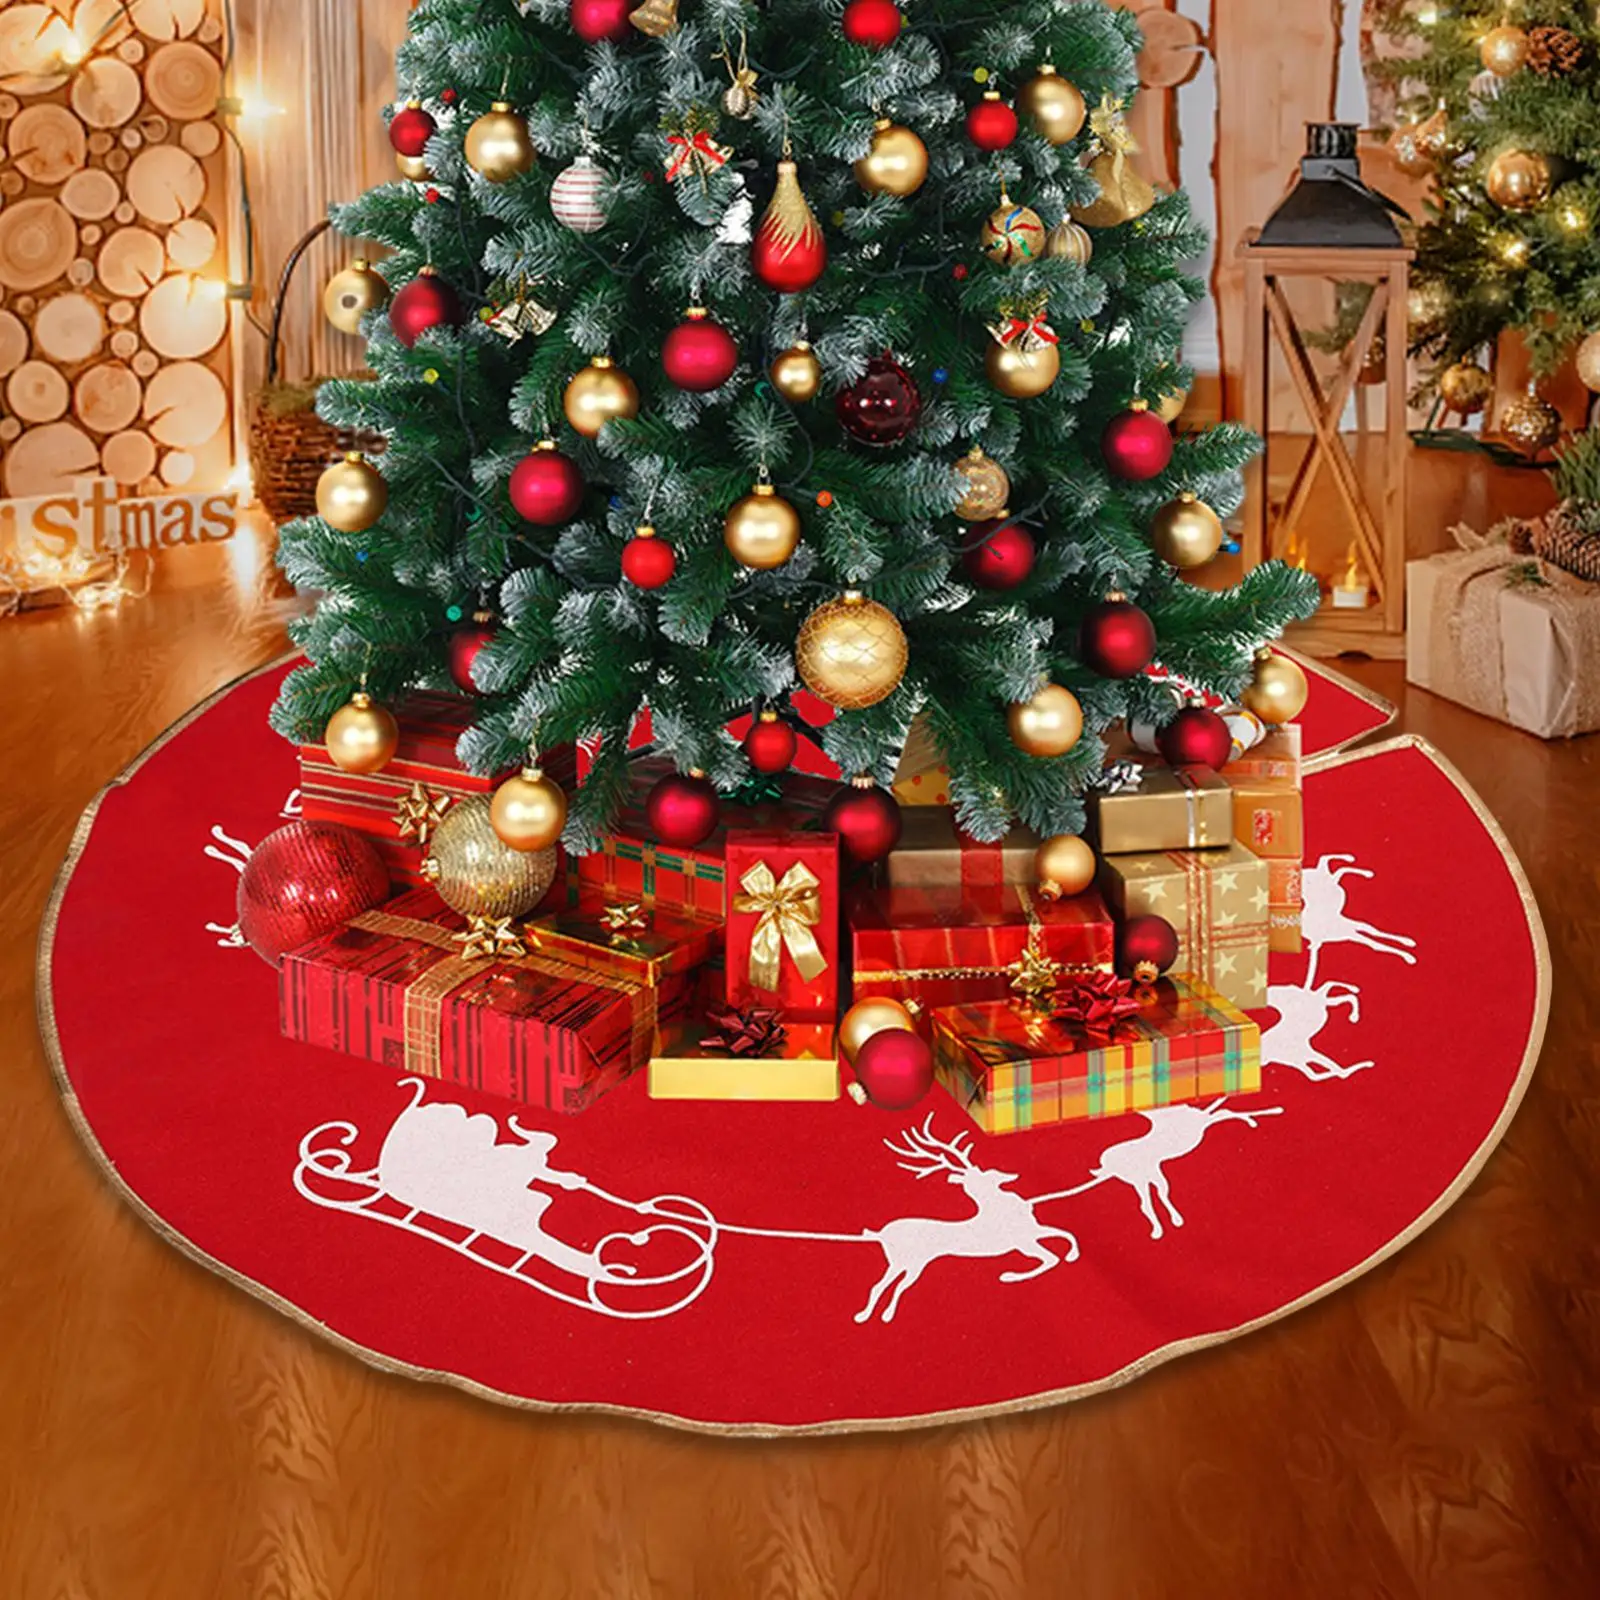 Christmas Tree Skirt Red Carpet Round Reusable Christmas Decoration for Winter Festival Party New Year Holiday Indoor Outdoor